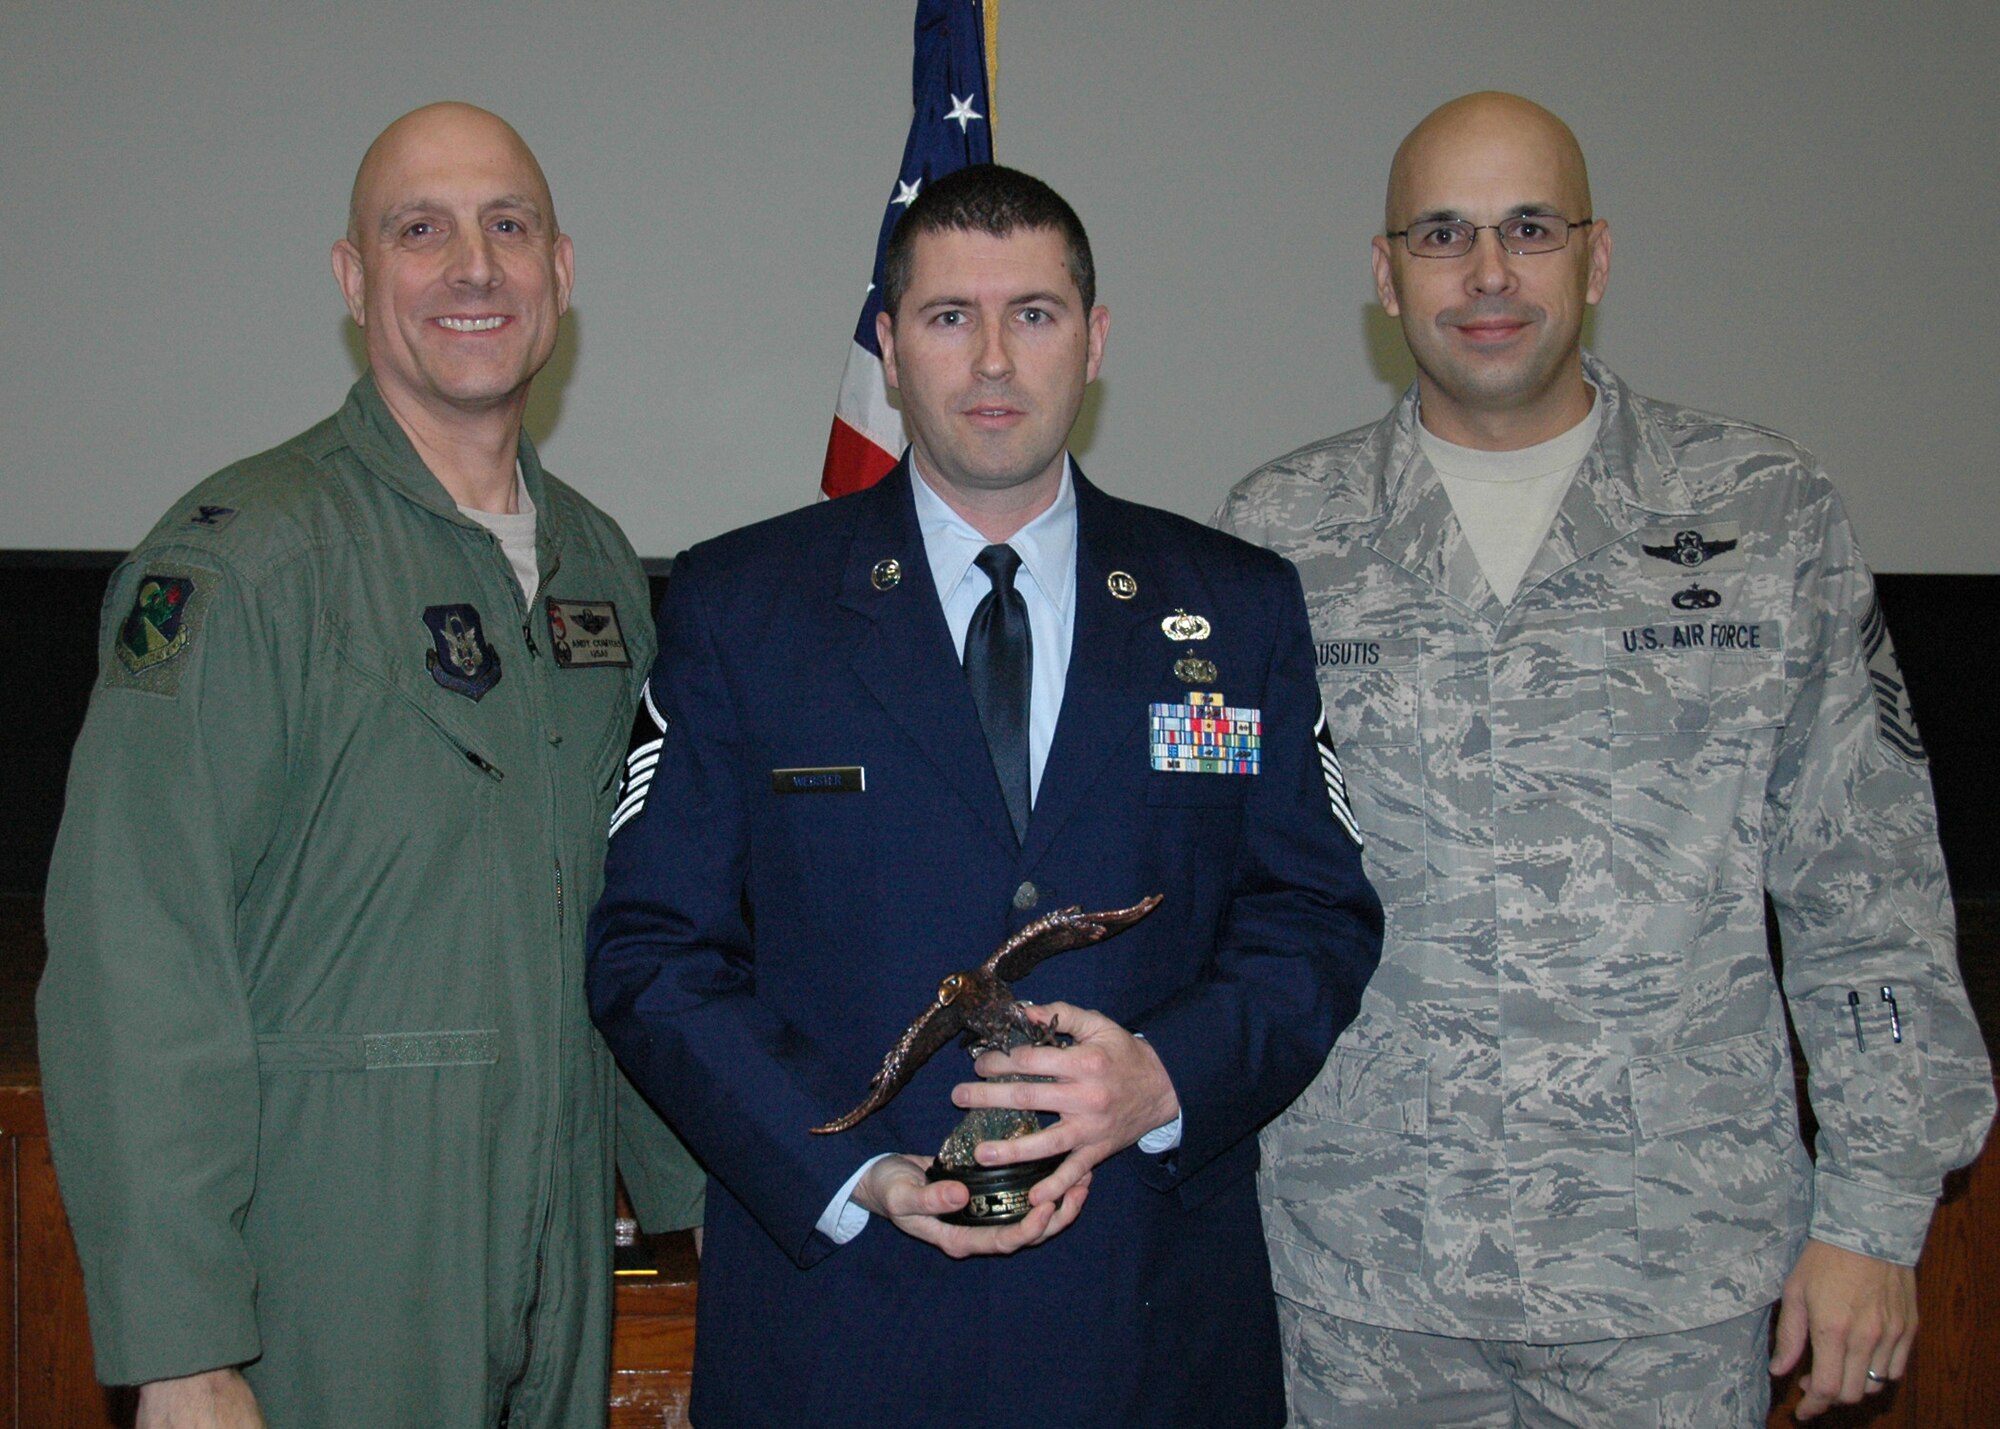 Master Sgt. Thomas Webster from the 919th Operations Group, Detachment 2, was named 919th Special Operations Wing Senior NCO of the Year for 2011 during the wing's March unit training assembly at Duke Field.  Flanking him are Col. Andy Comtois, 919th SOW commander, left, and Chief Master Sgt. Michael Klausutis, 919th SOW command chief, who likewise honored their most outstanding Citizen Commandos in the Airman, NCO and company grade officer categories.  (U.S. Air Force photo/Dan Neely)